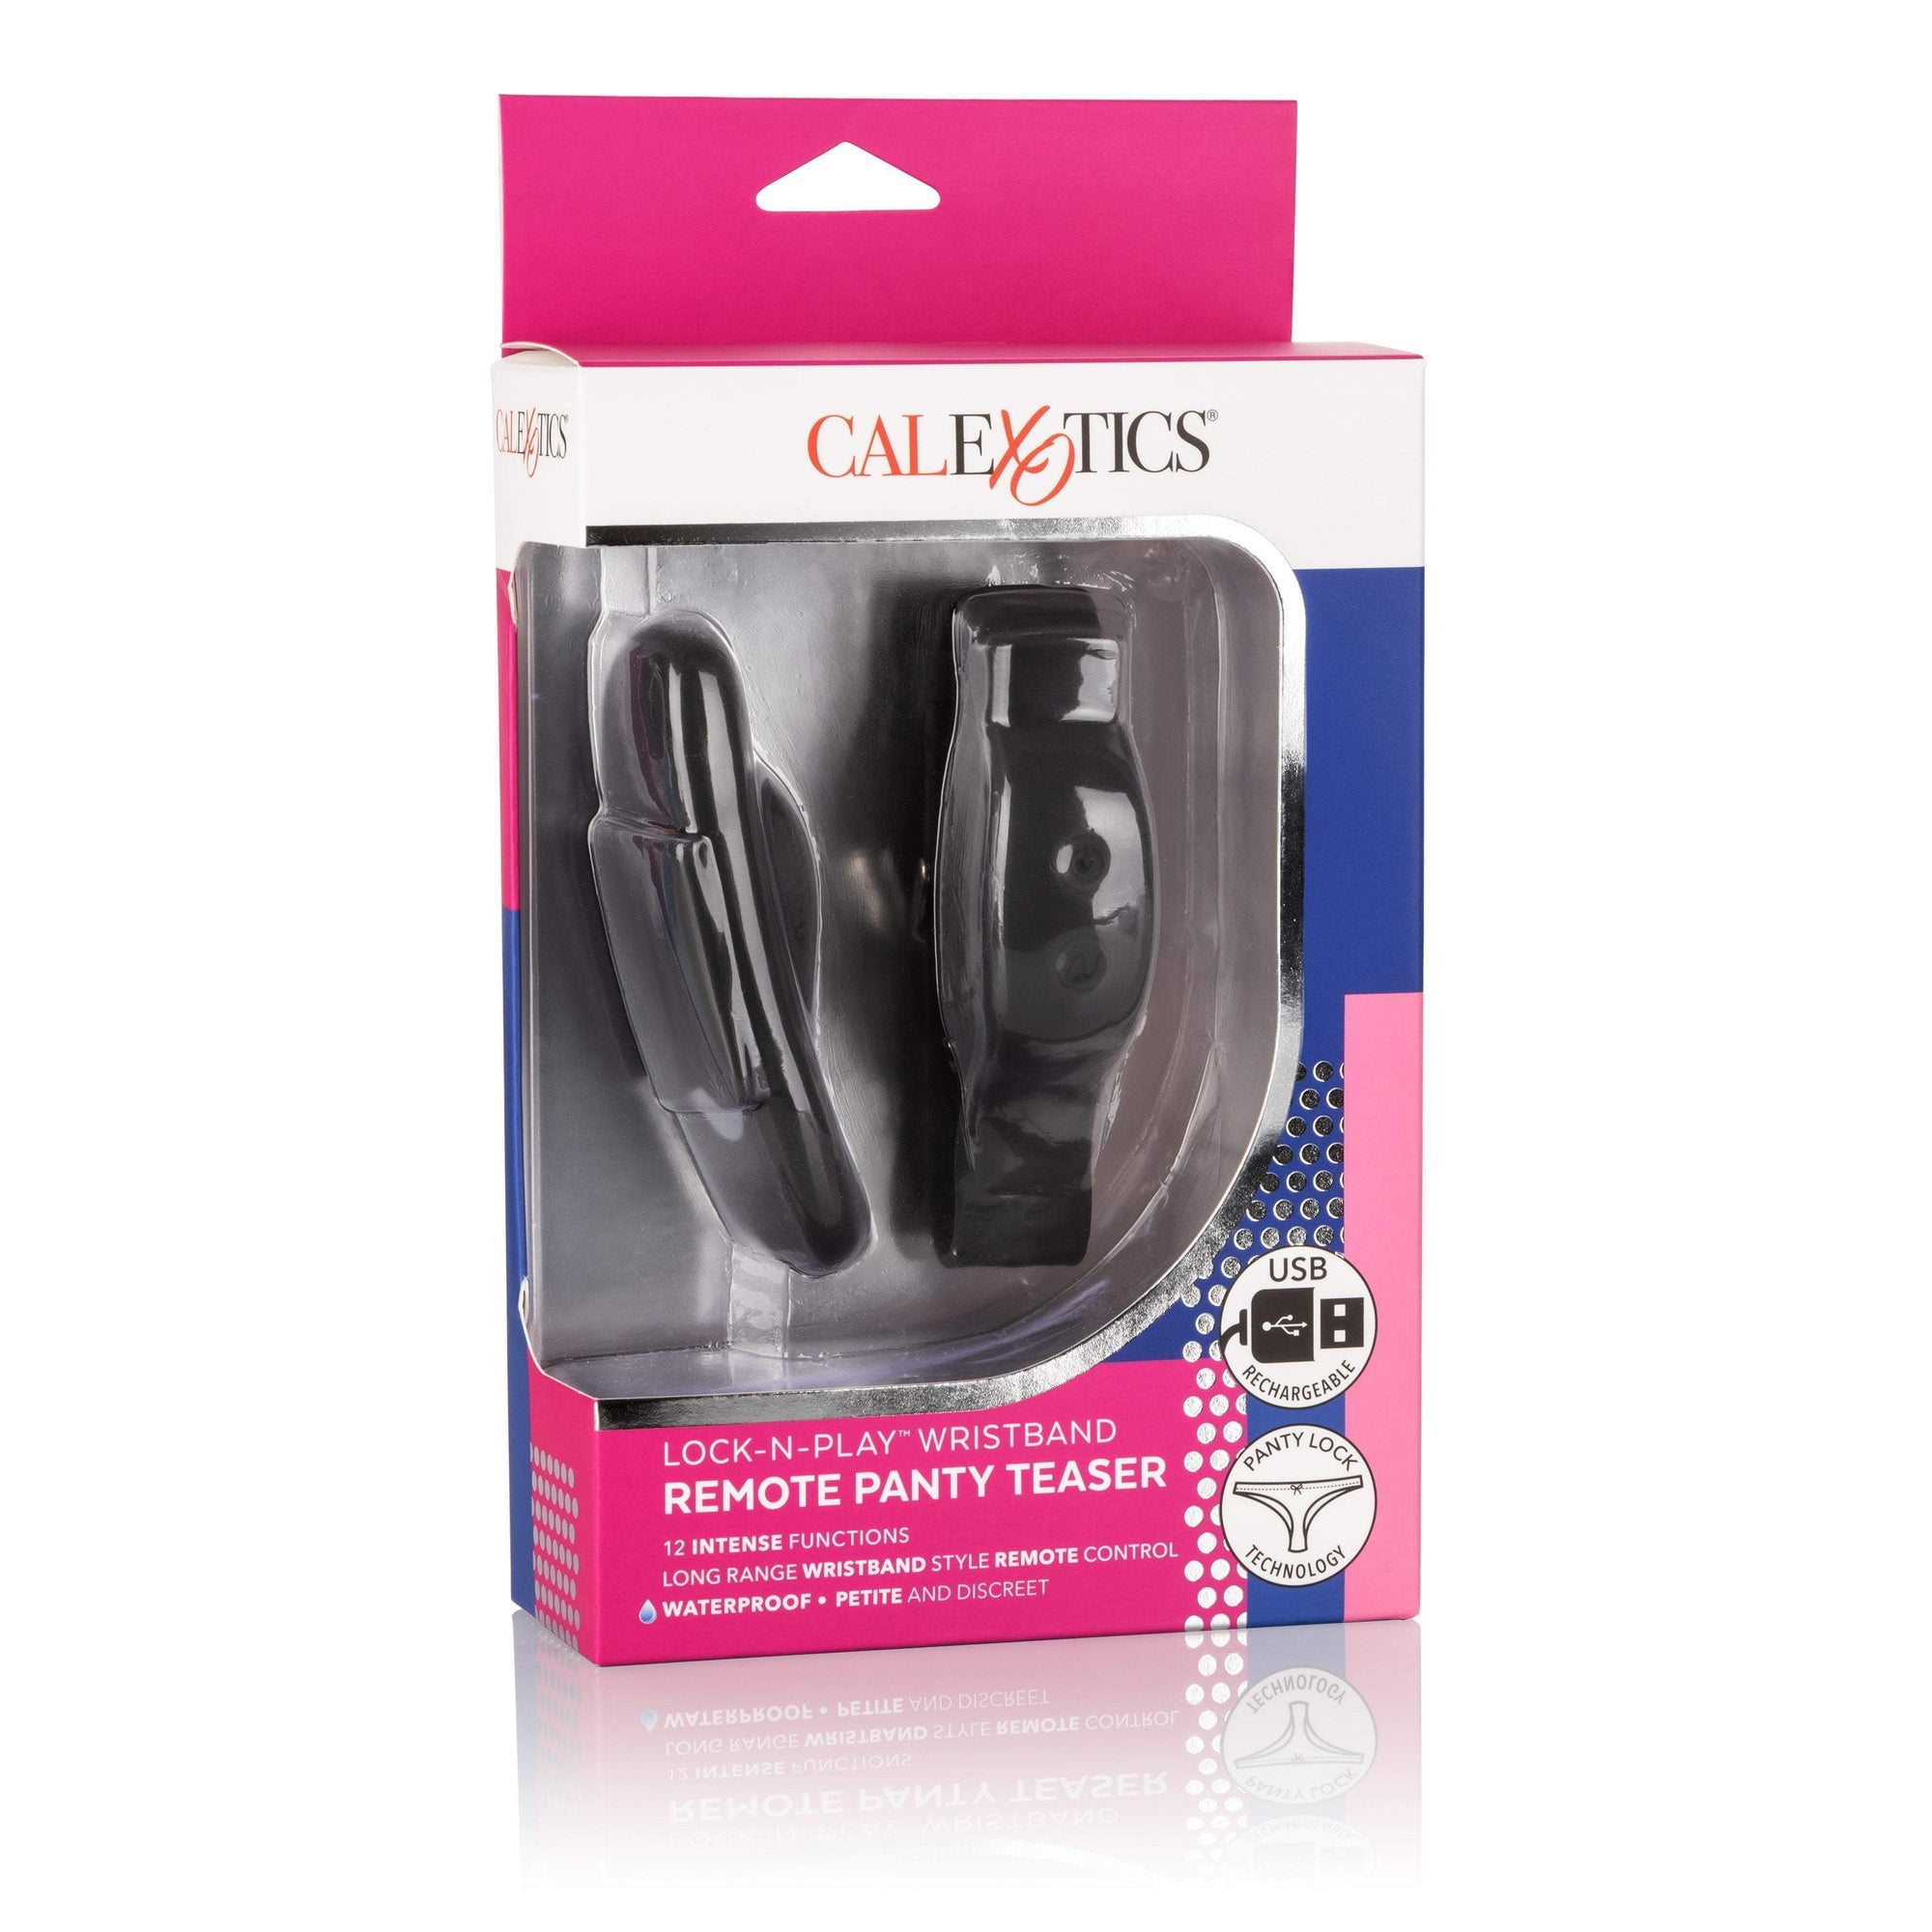 California Exotics - Lock-N-Play Wristband Remote Panty Vibrator (Black) Panties Massager Remote Control (Vibration) Rechargeable